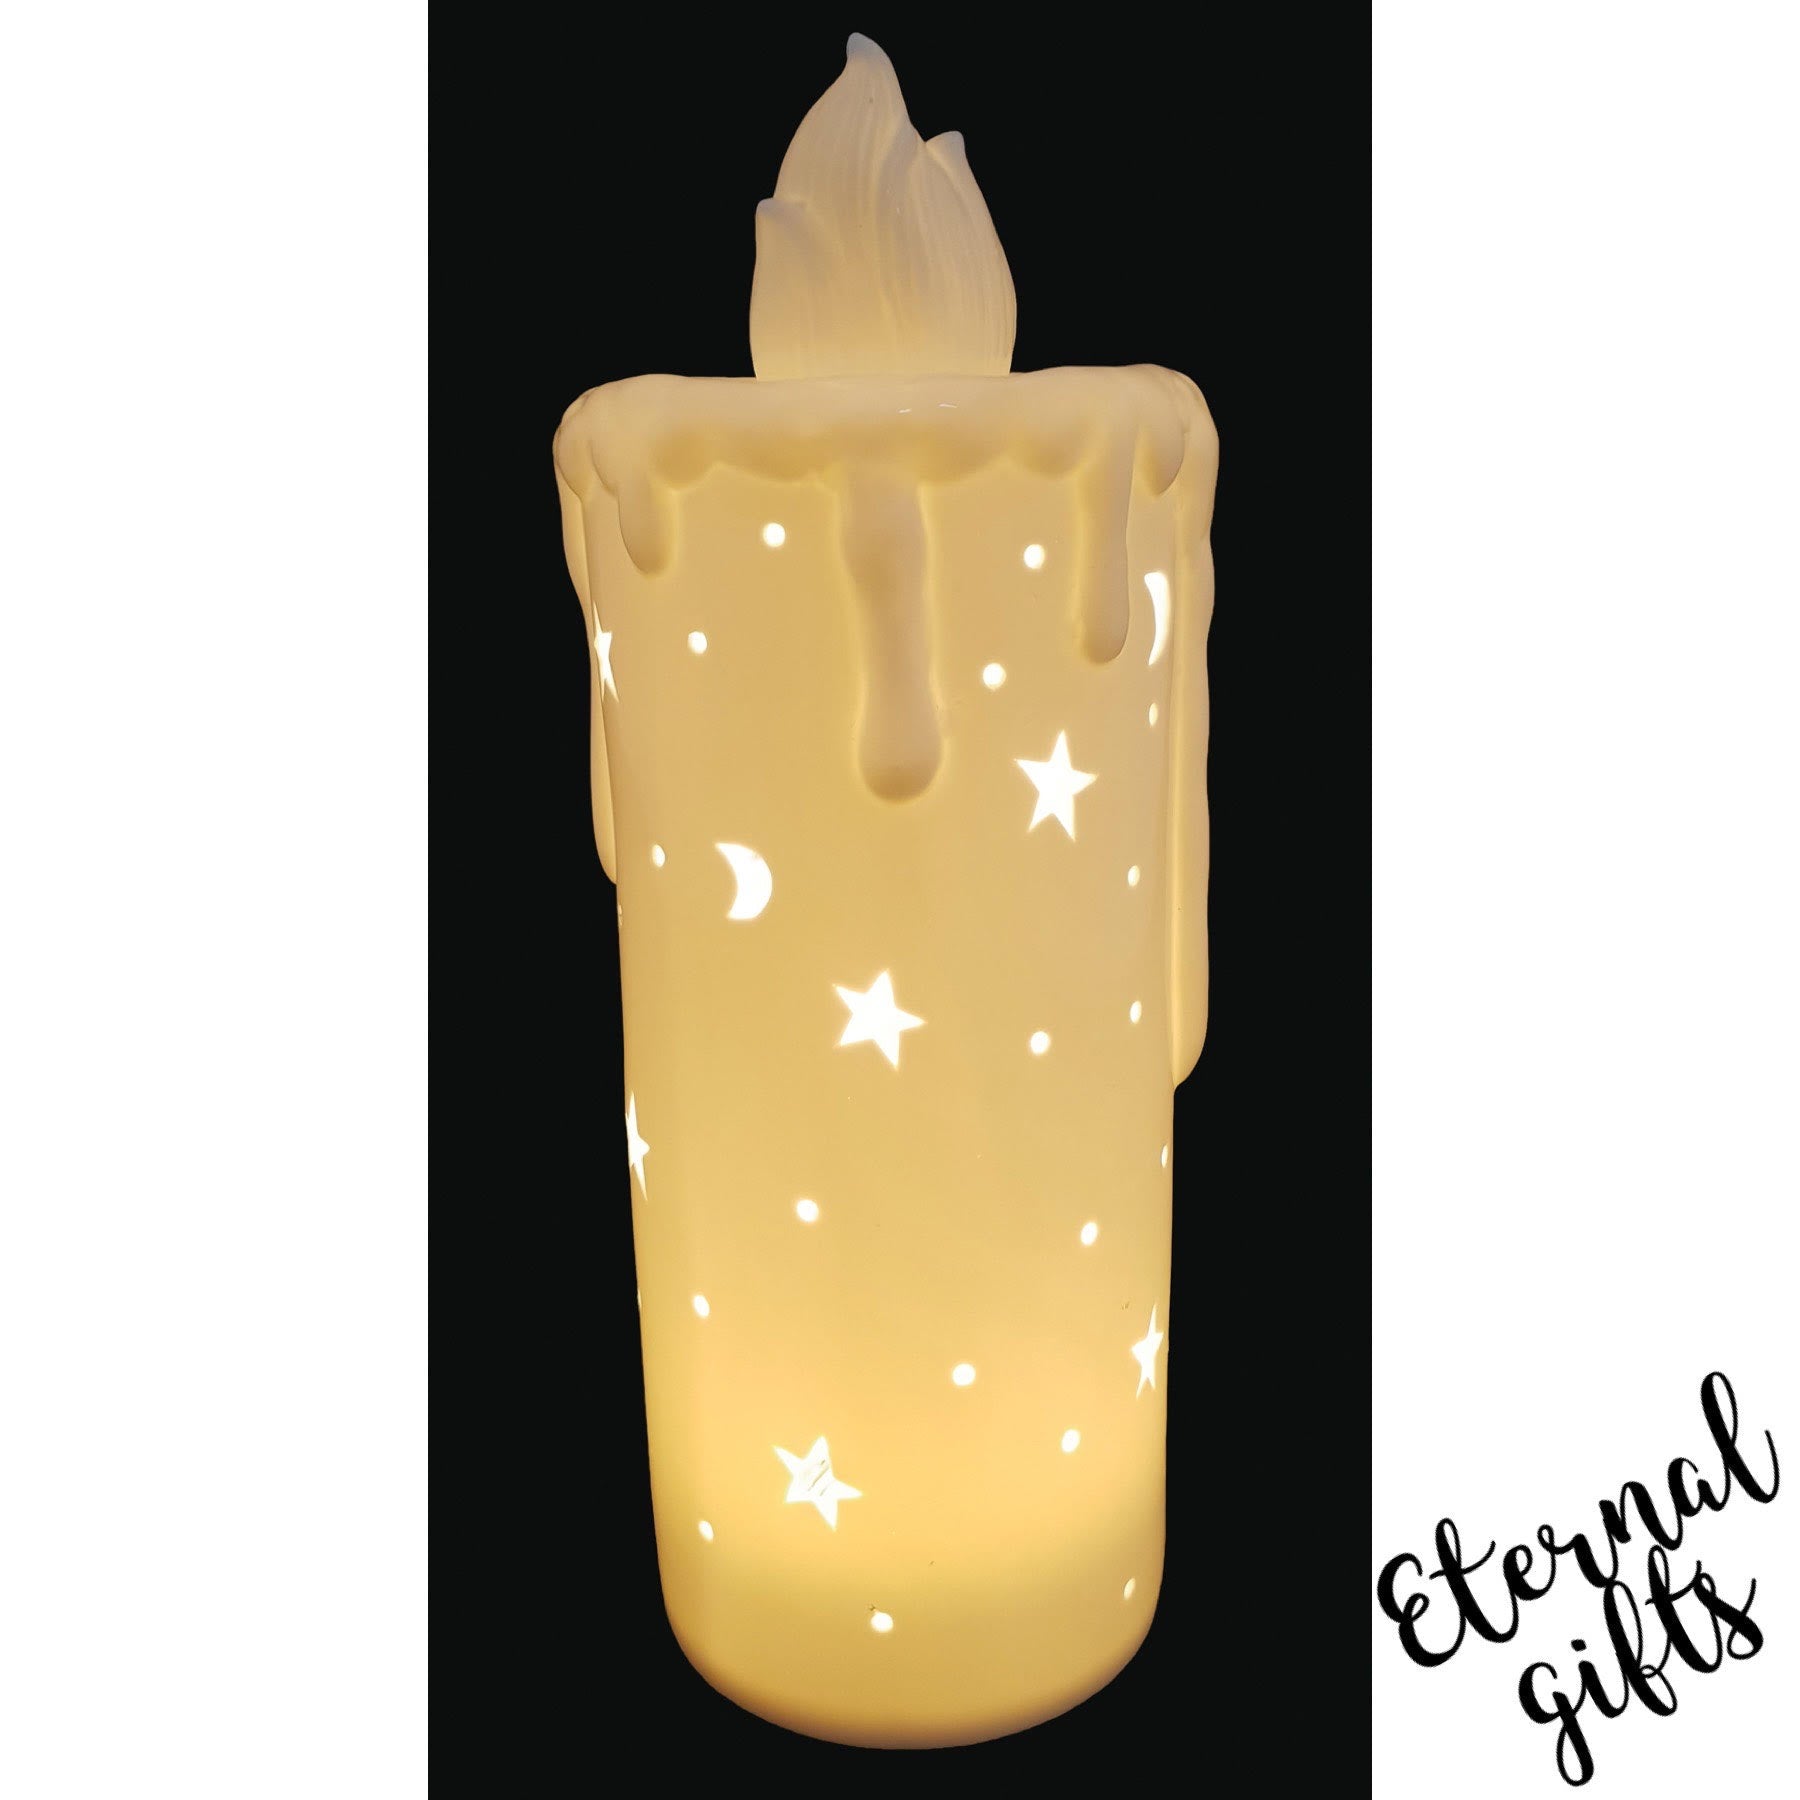 Large White Ceramic Candle with Light